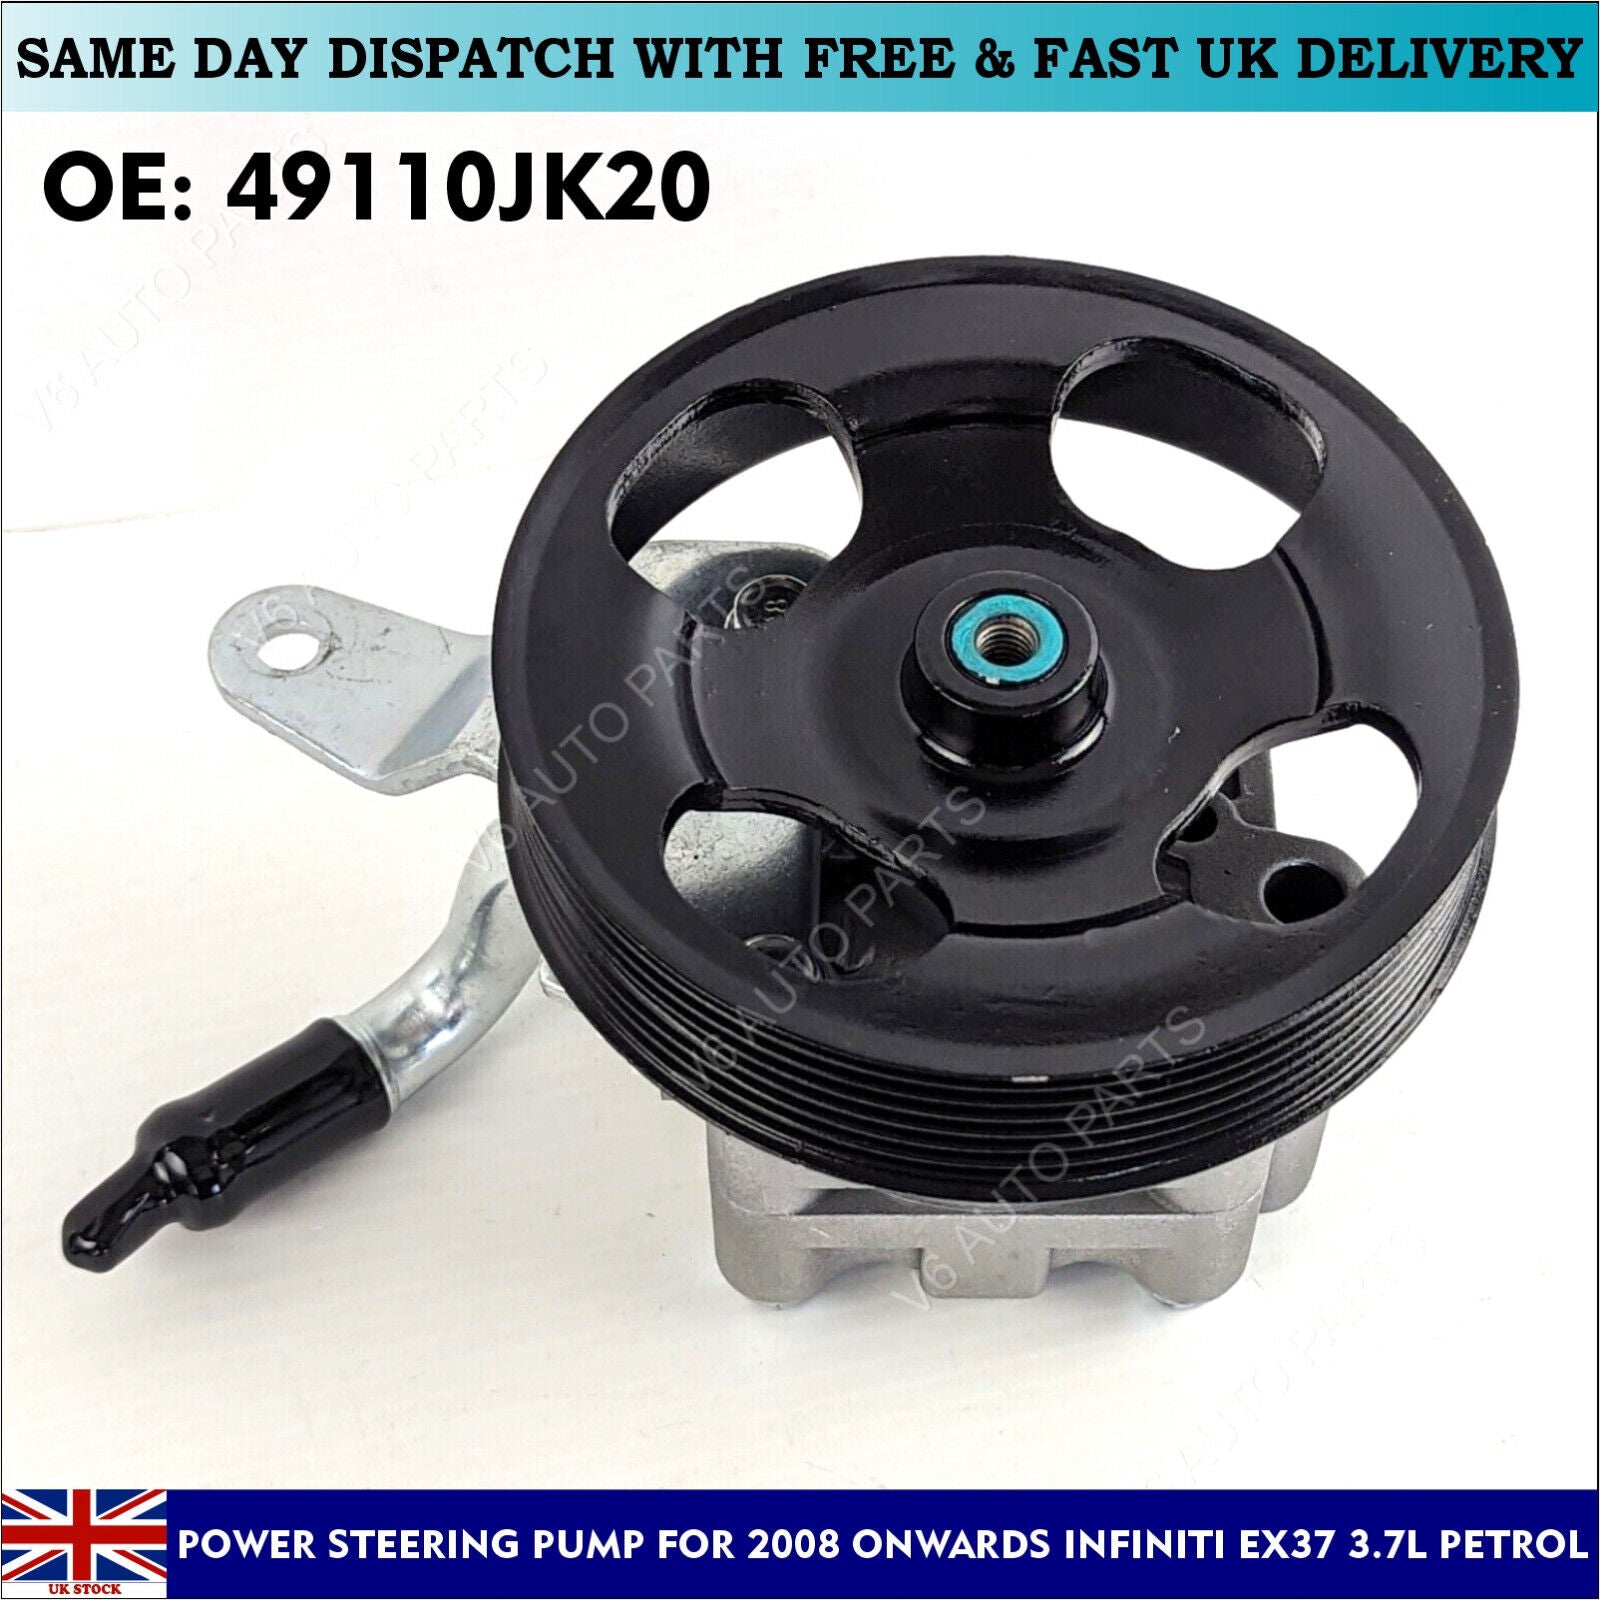 Power Steering Pump For 2008 Onwards Infiniti Nissan Skyline Crossover AWD 2WD